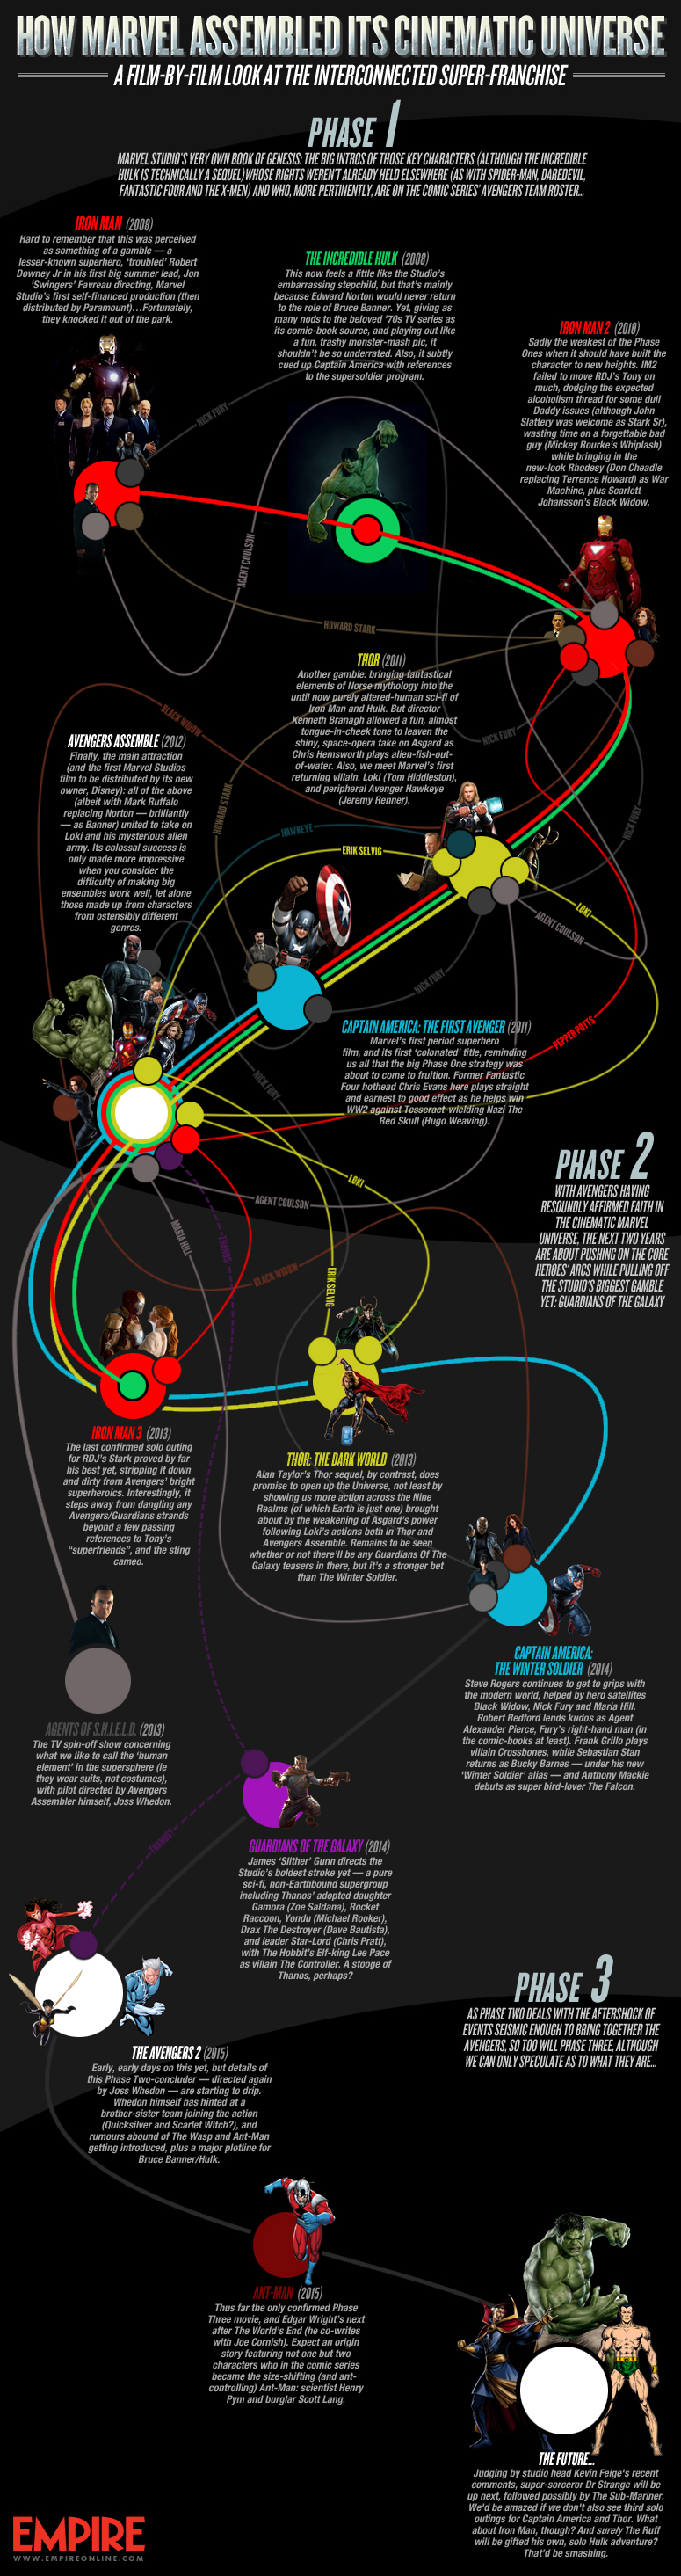 How Marvel Assembled Its Cinematic Universe - Infographic 